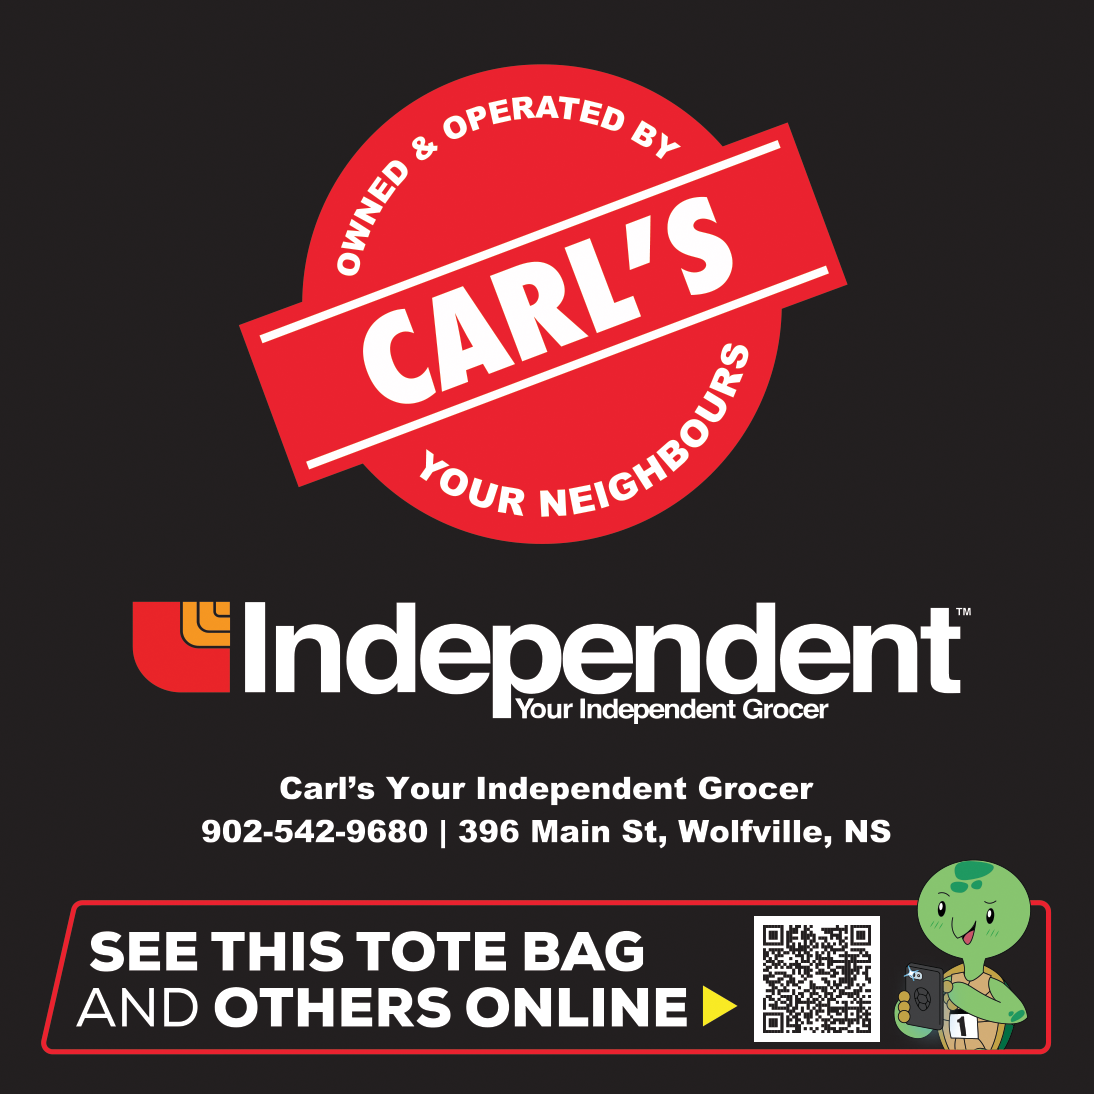 Carl's Your Independent